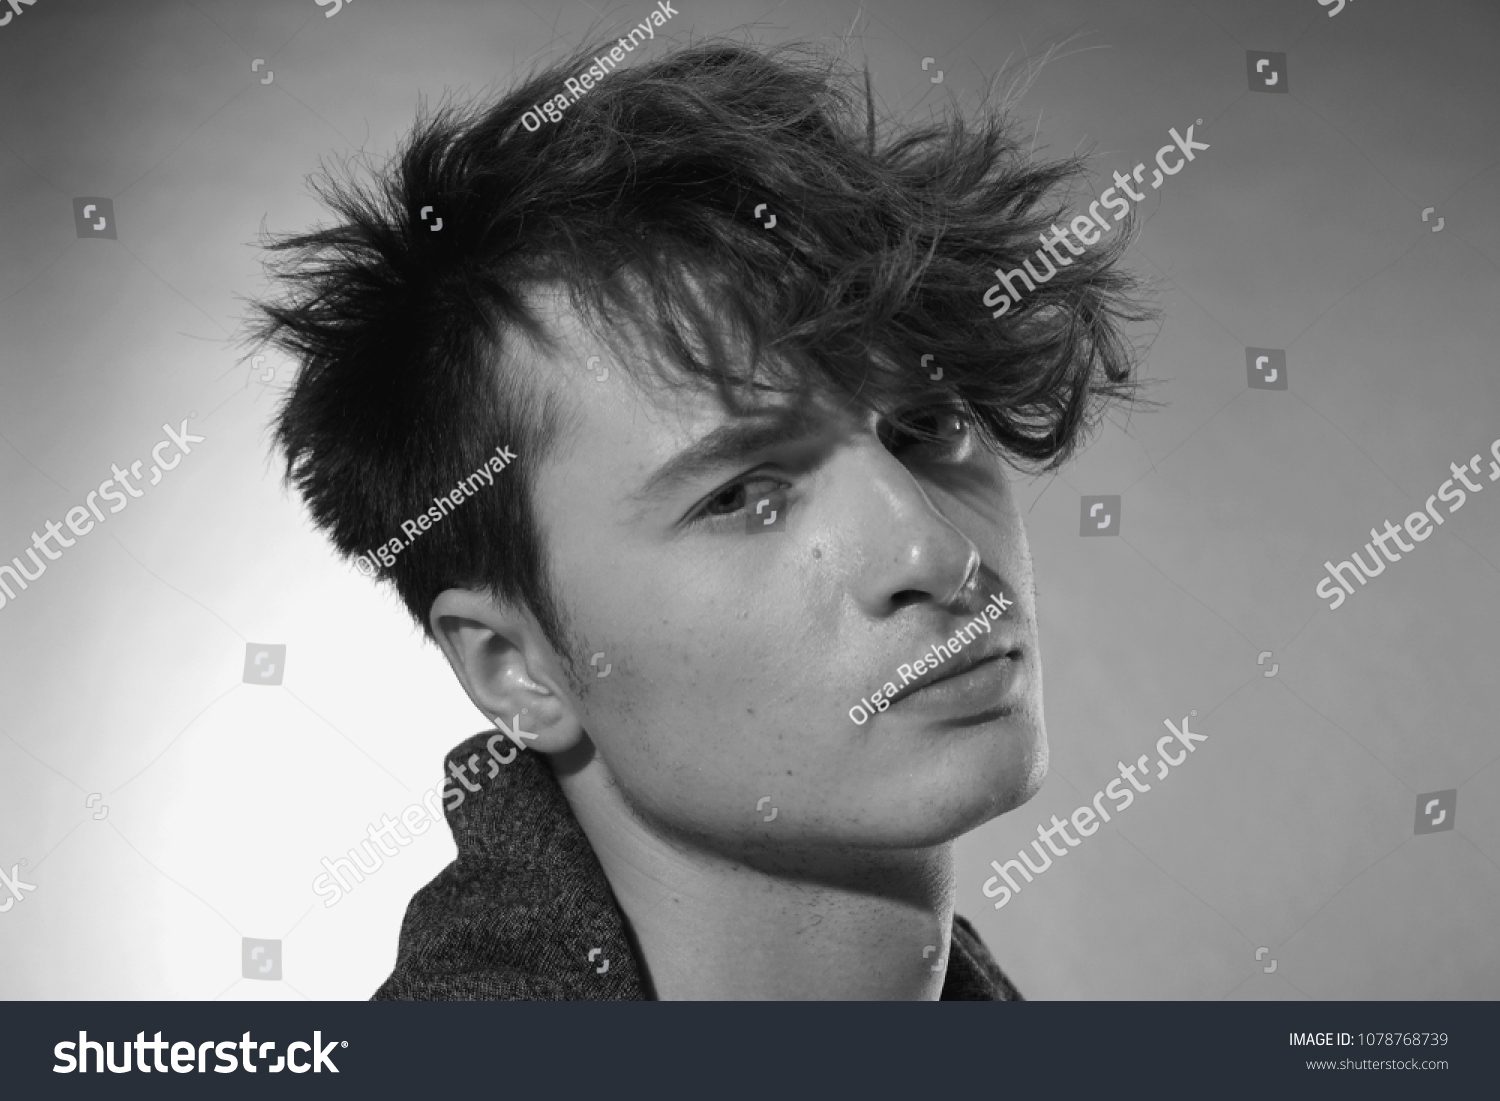 Man face close up. Beautiful young guy with long forelock, quiff. Black and white handsome male portrait on grey background. #1078768739